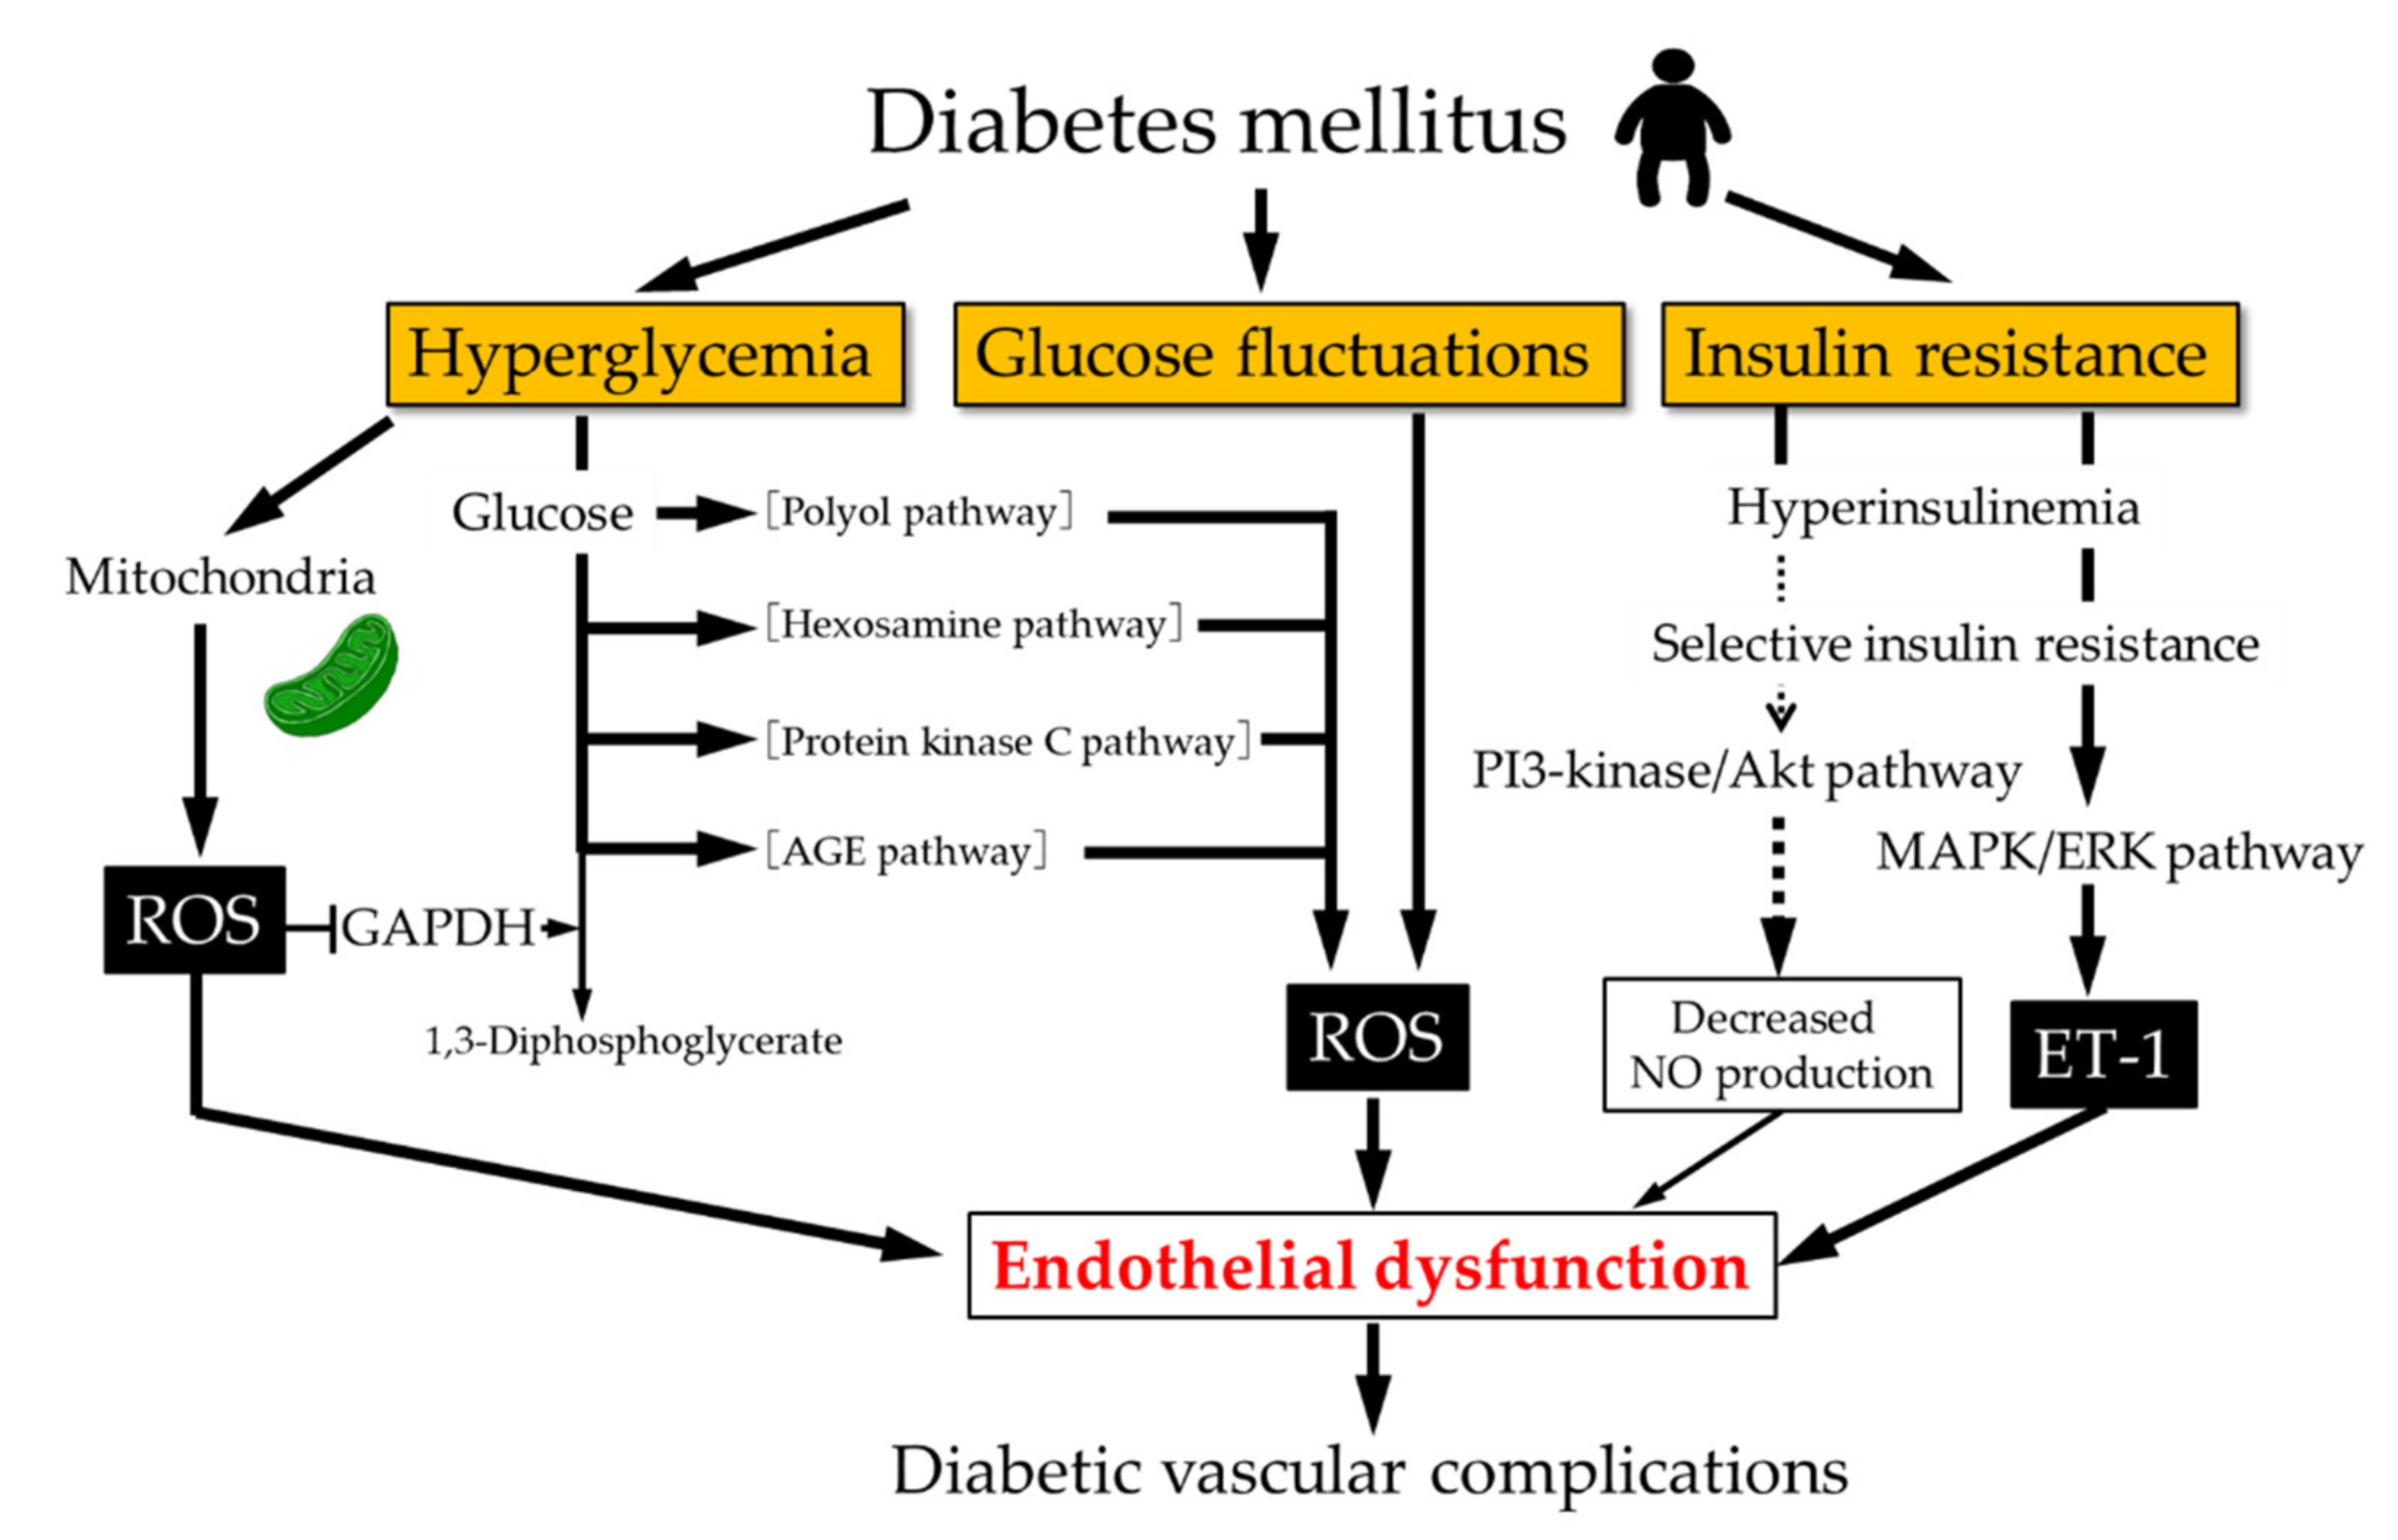 Hyperglycemia and insulin resistance